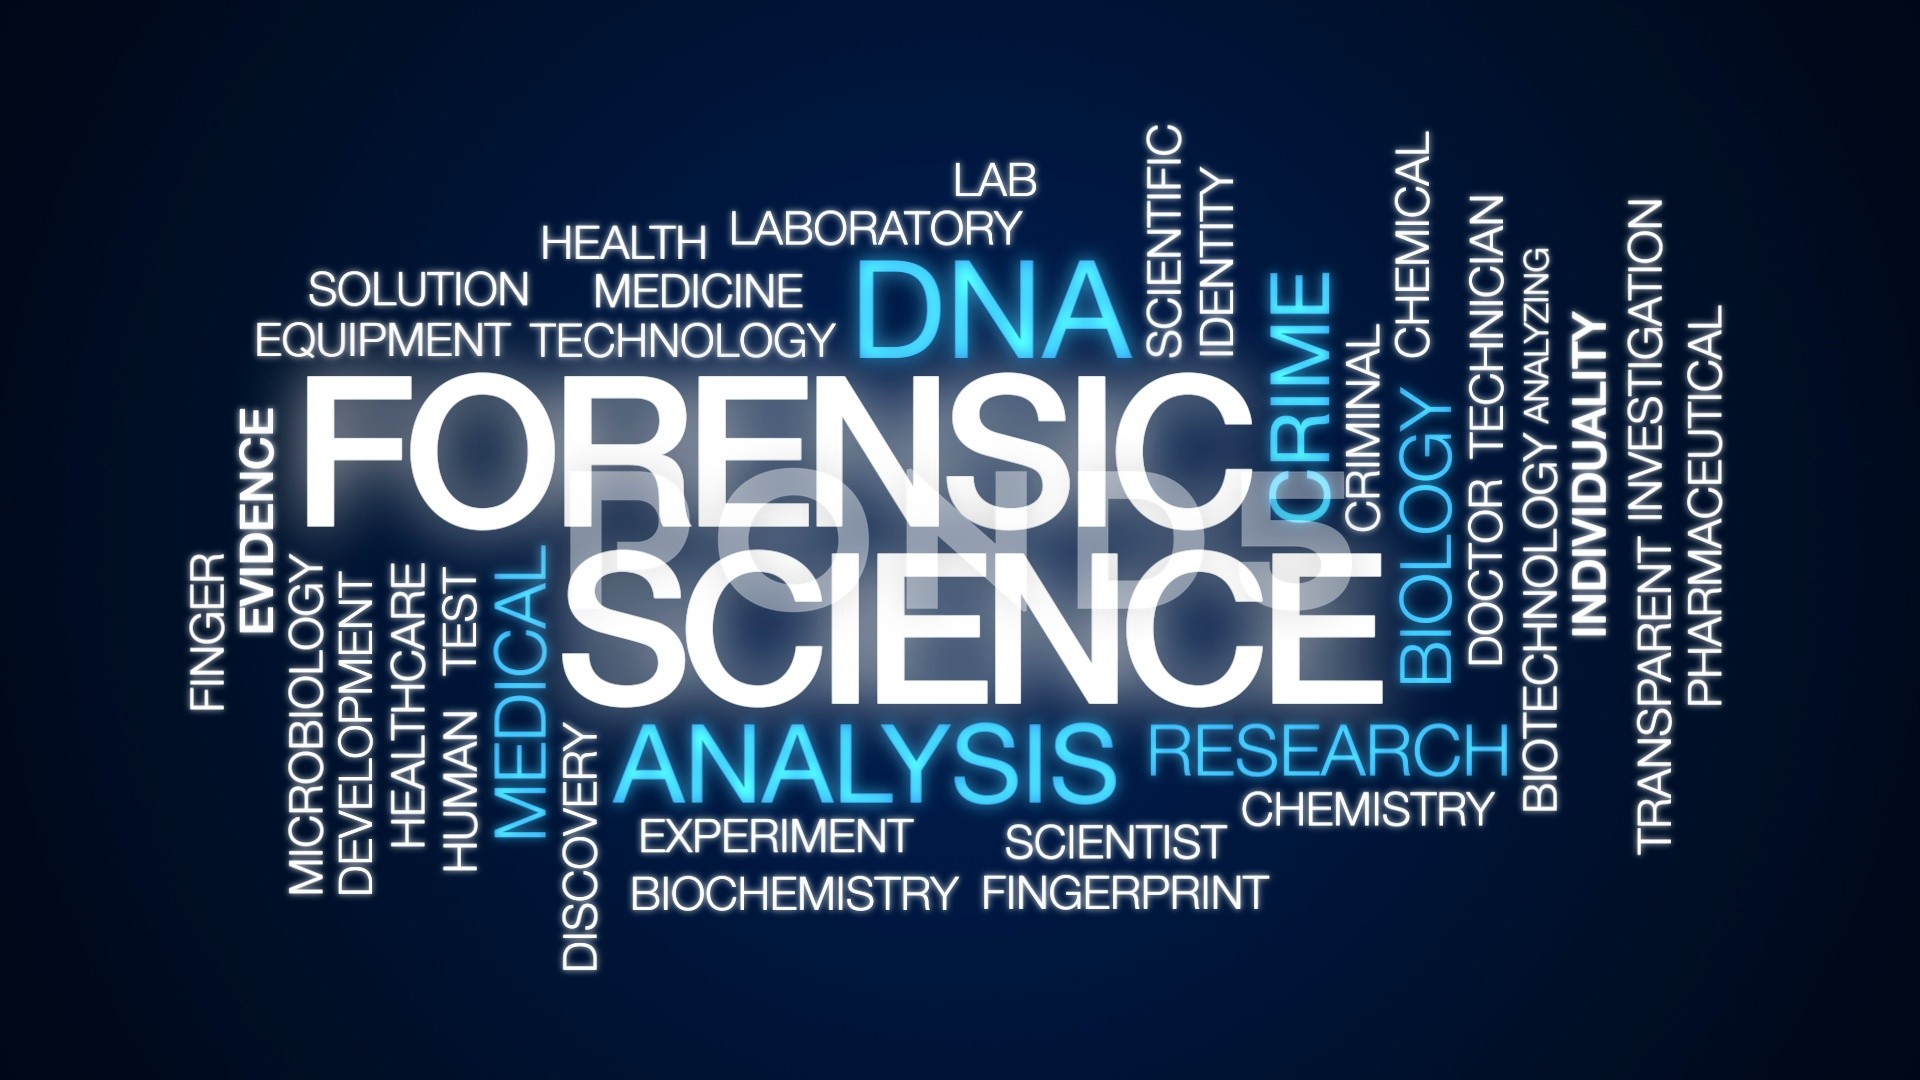 1920x1080 Cytotechnology and forensic chemistry global events conference jpg   Biochemistry wallpaper medicine